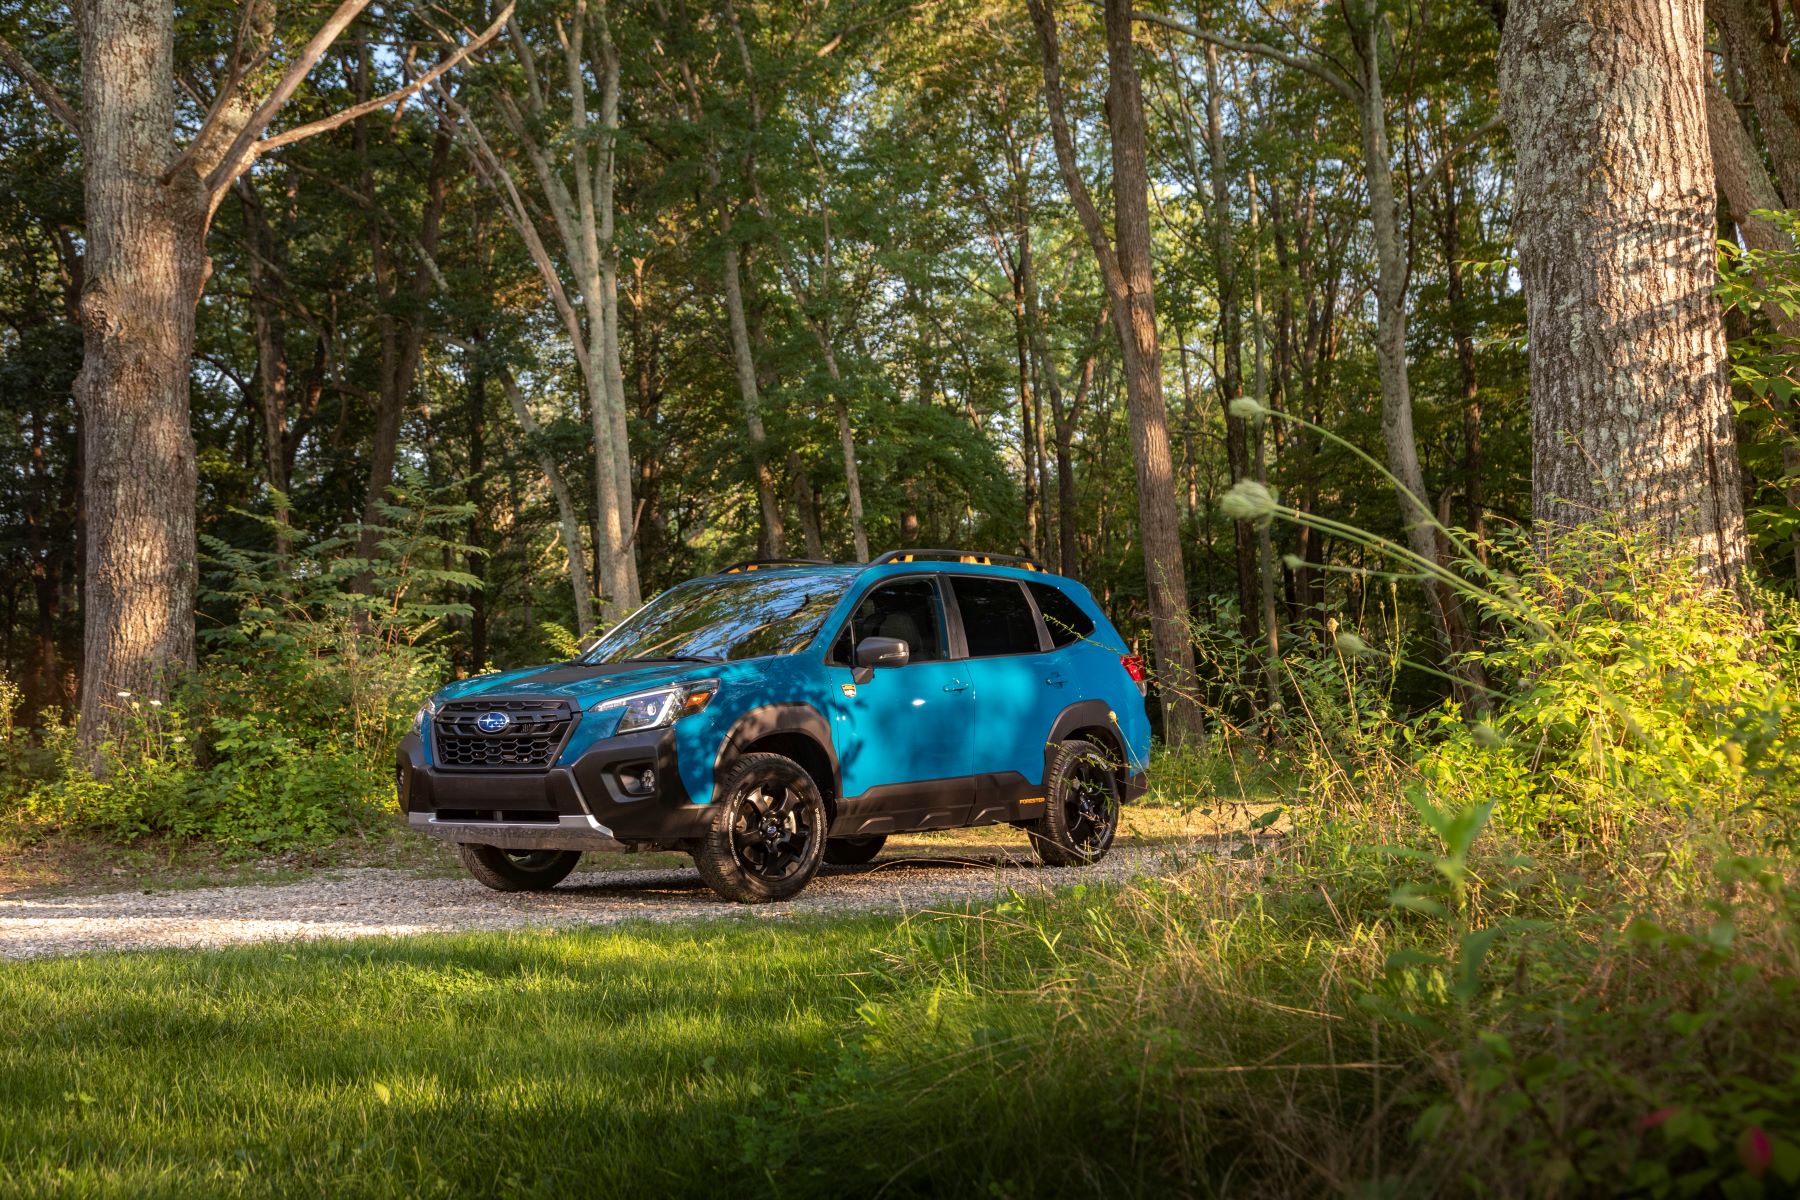 A light blue 2022 Subaru Forester Wilderness compact SUV model parked on a forest trail bathed in sunlight